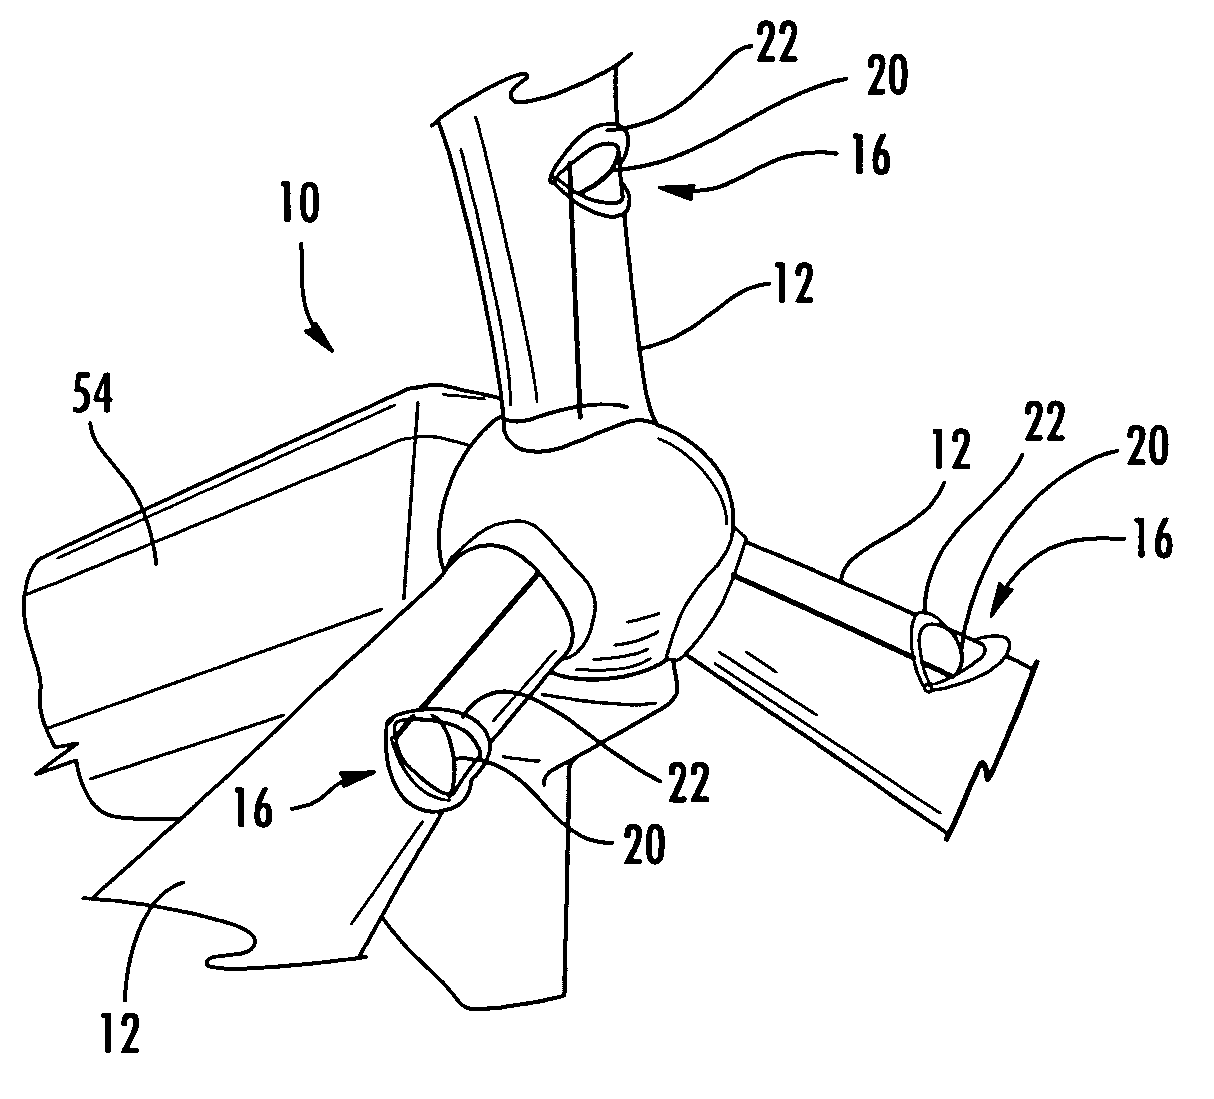 Debris removal system and method for wind turbine blades